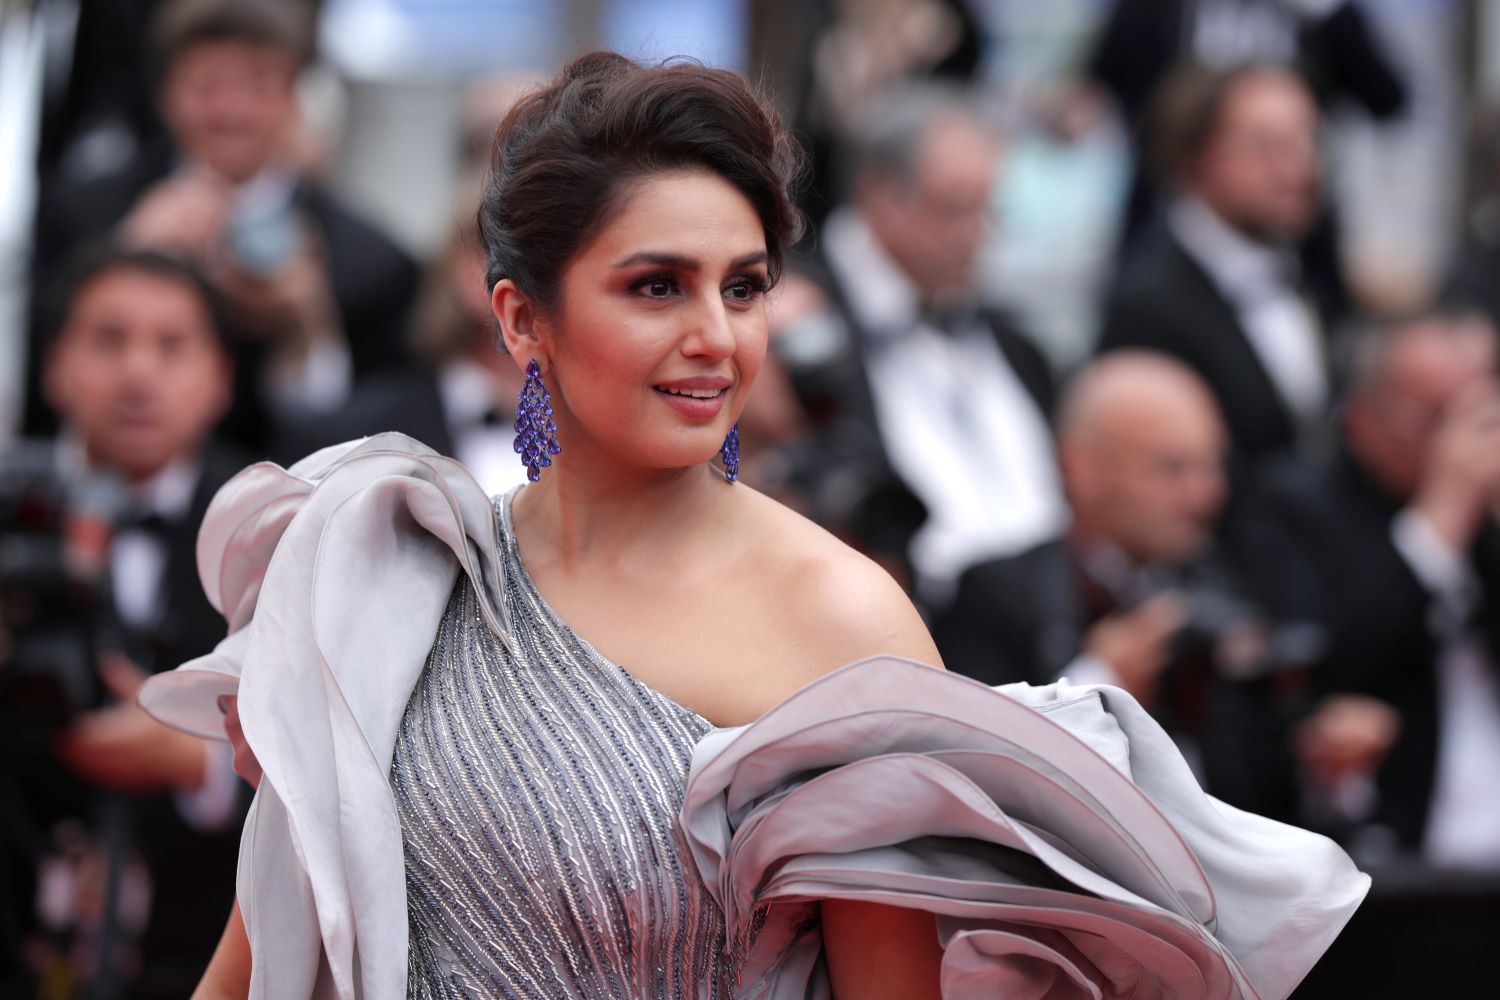 'Army of the Dead' star Huma Qureshi at the 72nd Annual Cannes Film Festival in 2019